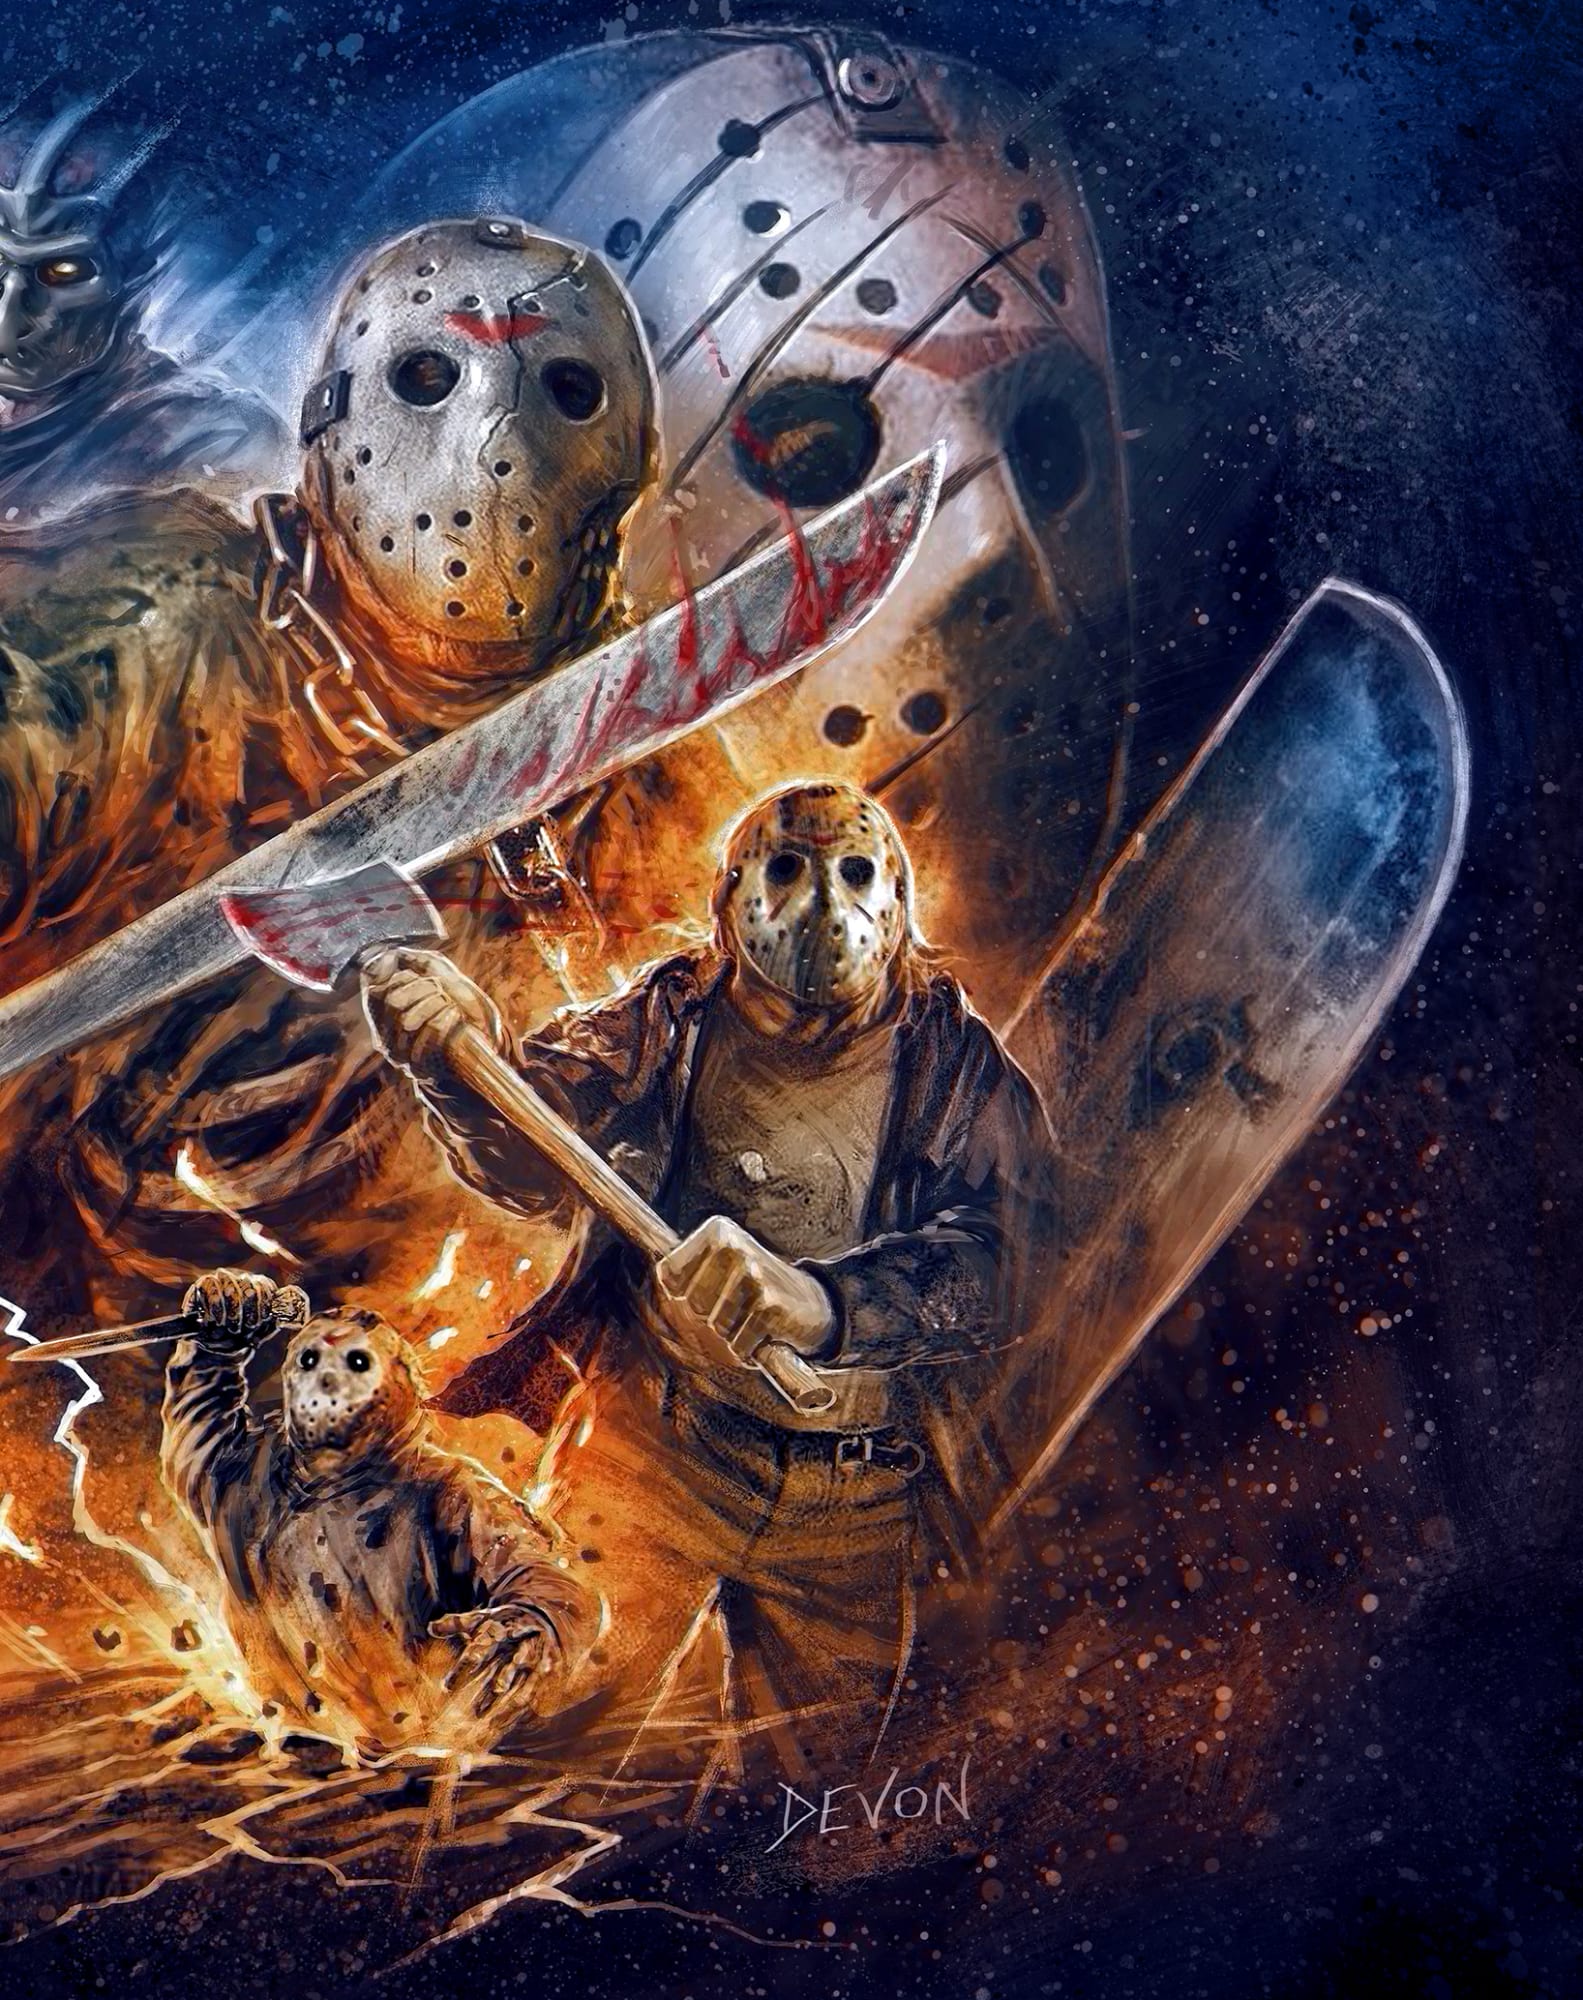 Is Camp Crystal Lake from Friday the 13th a real place?